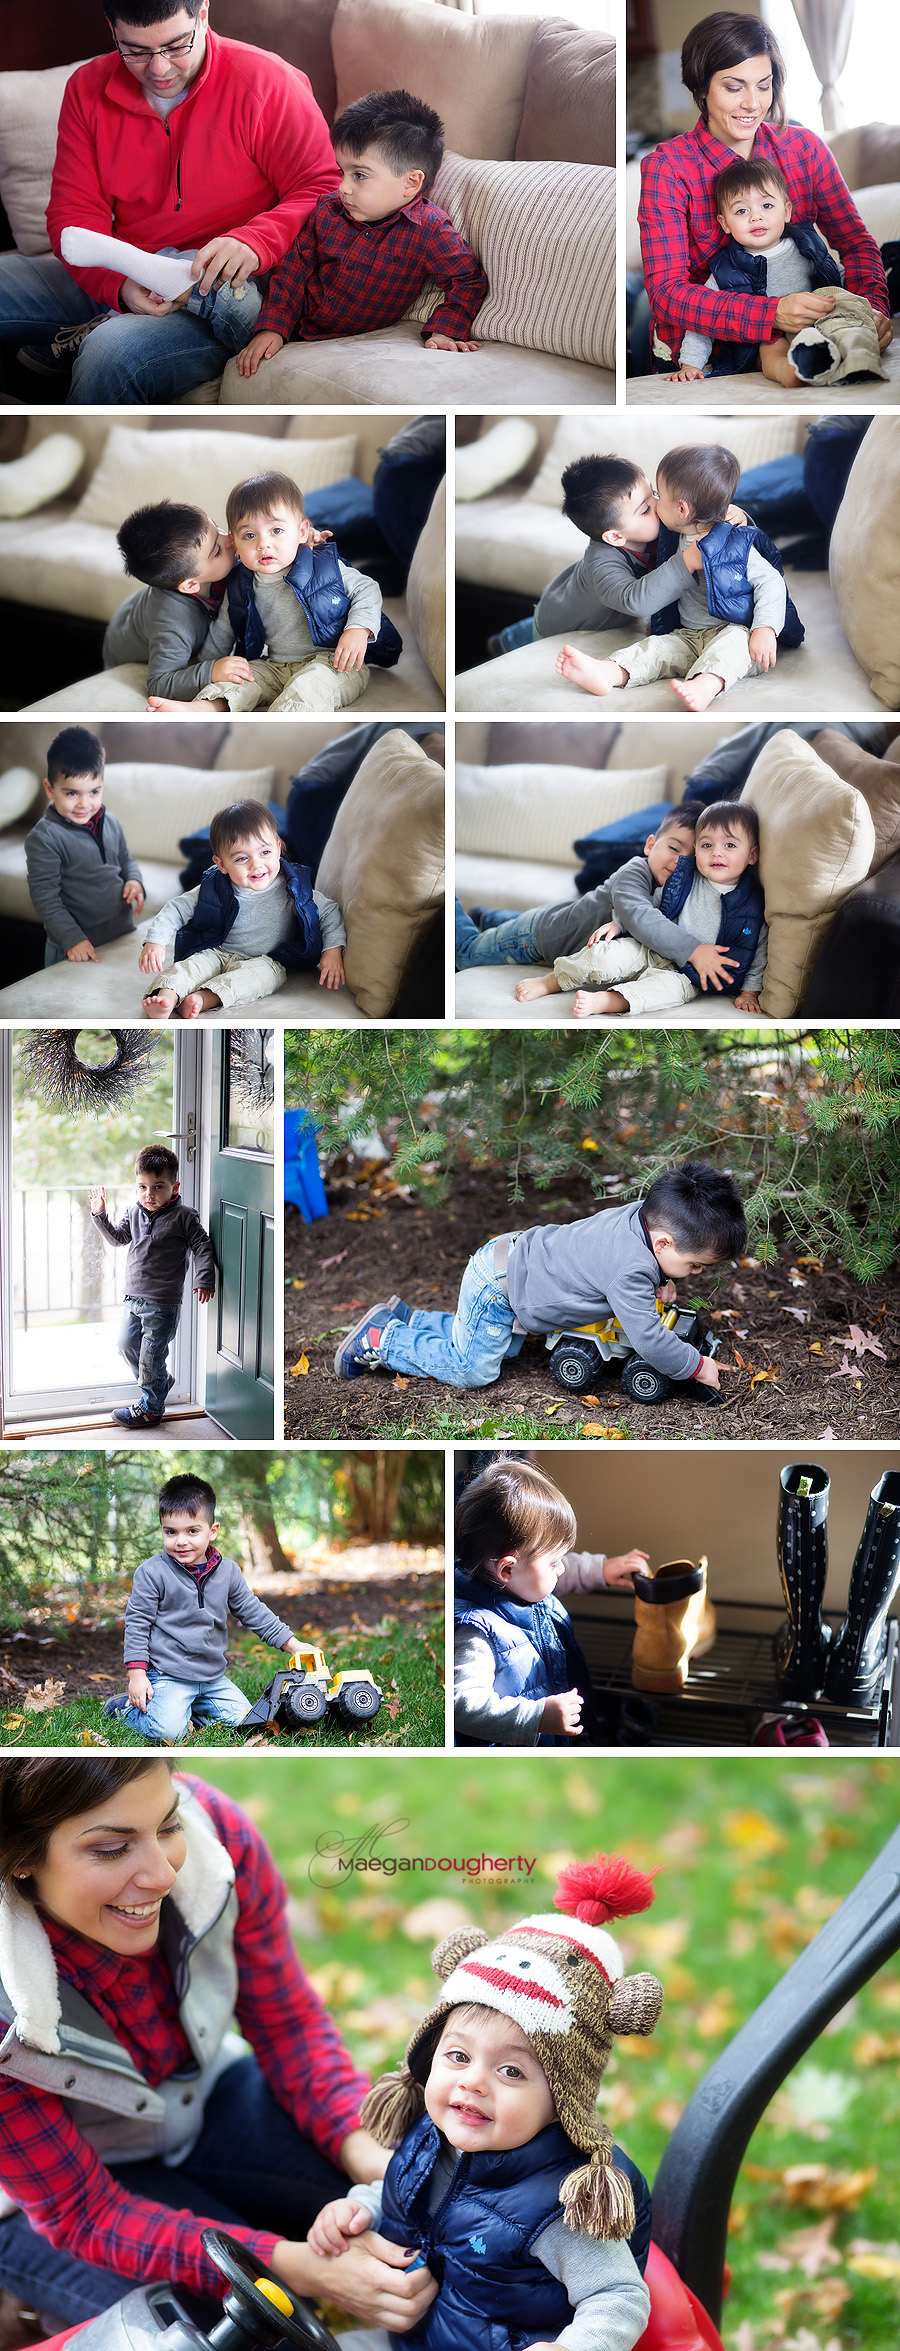 Maegan Dougherty photographs families in their homes in Bergen County, NJ